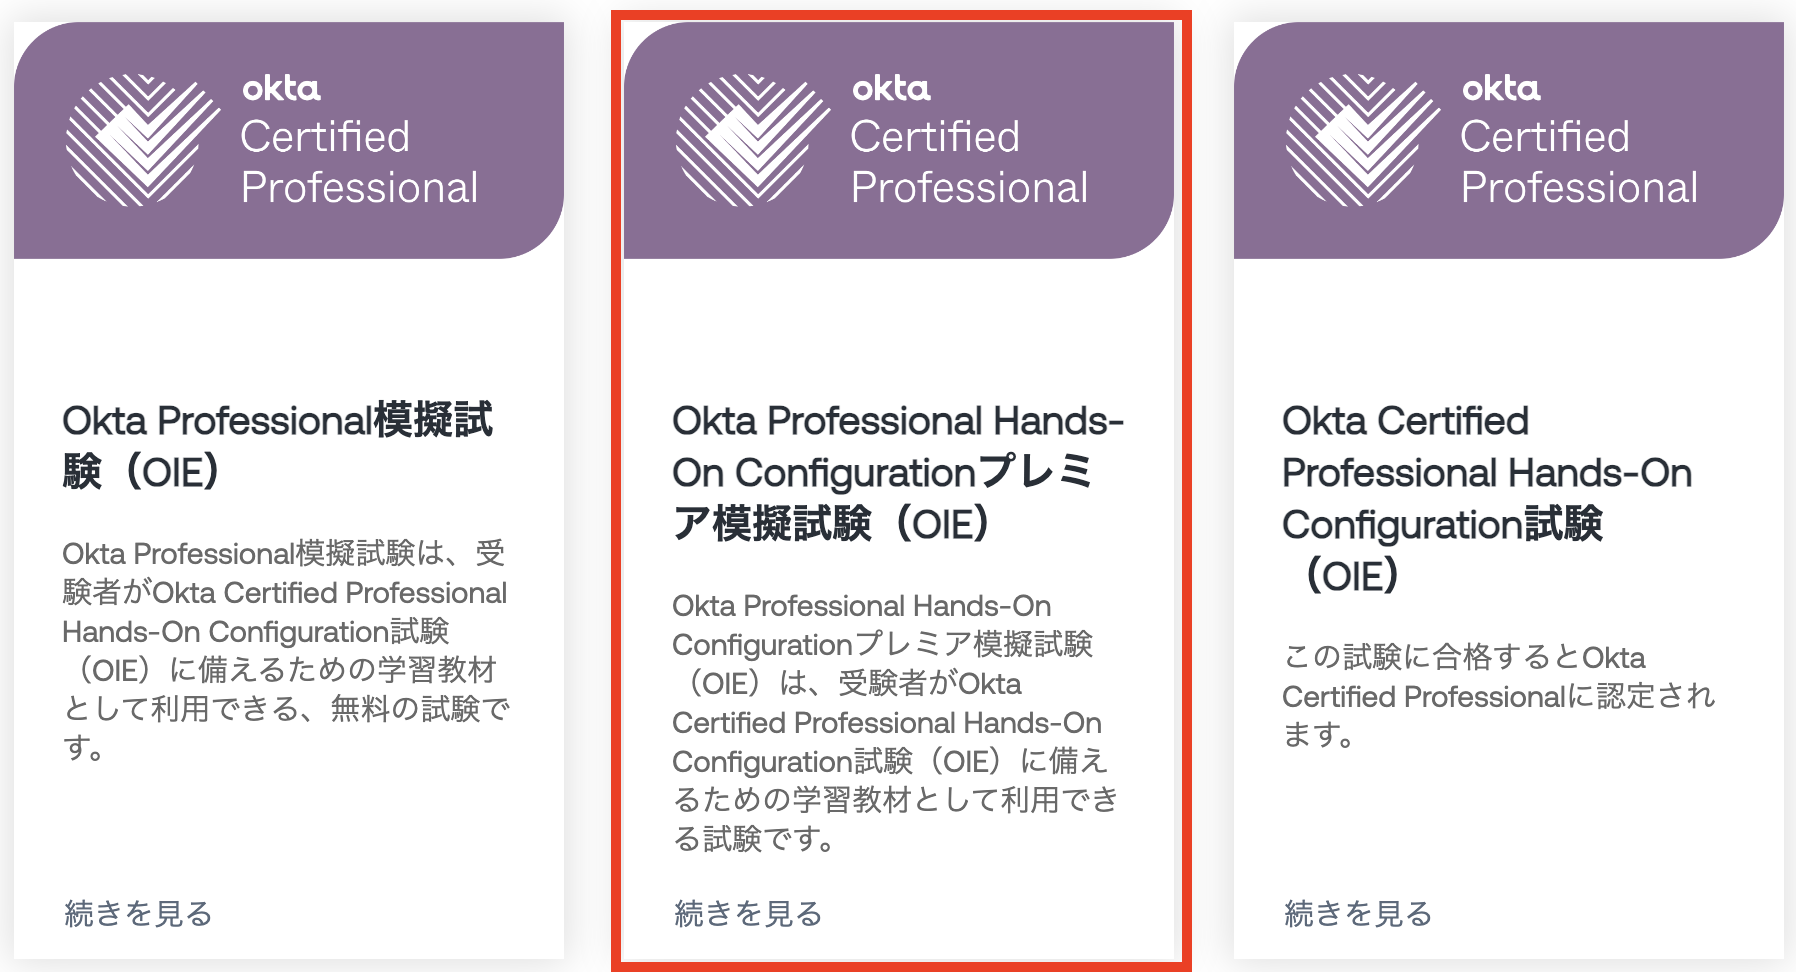 Image of the Okta Certified Professional Hands-On Configuration tile in-between two other certification tiles on a webpage.